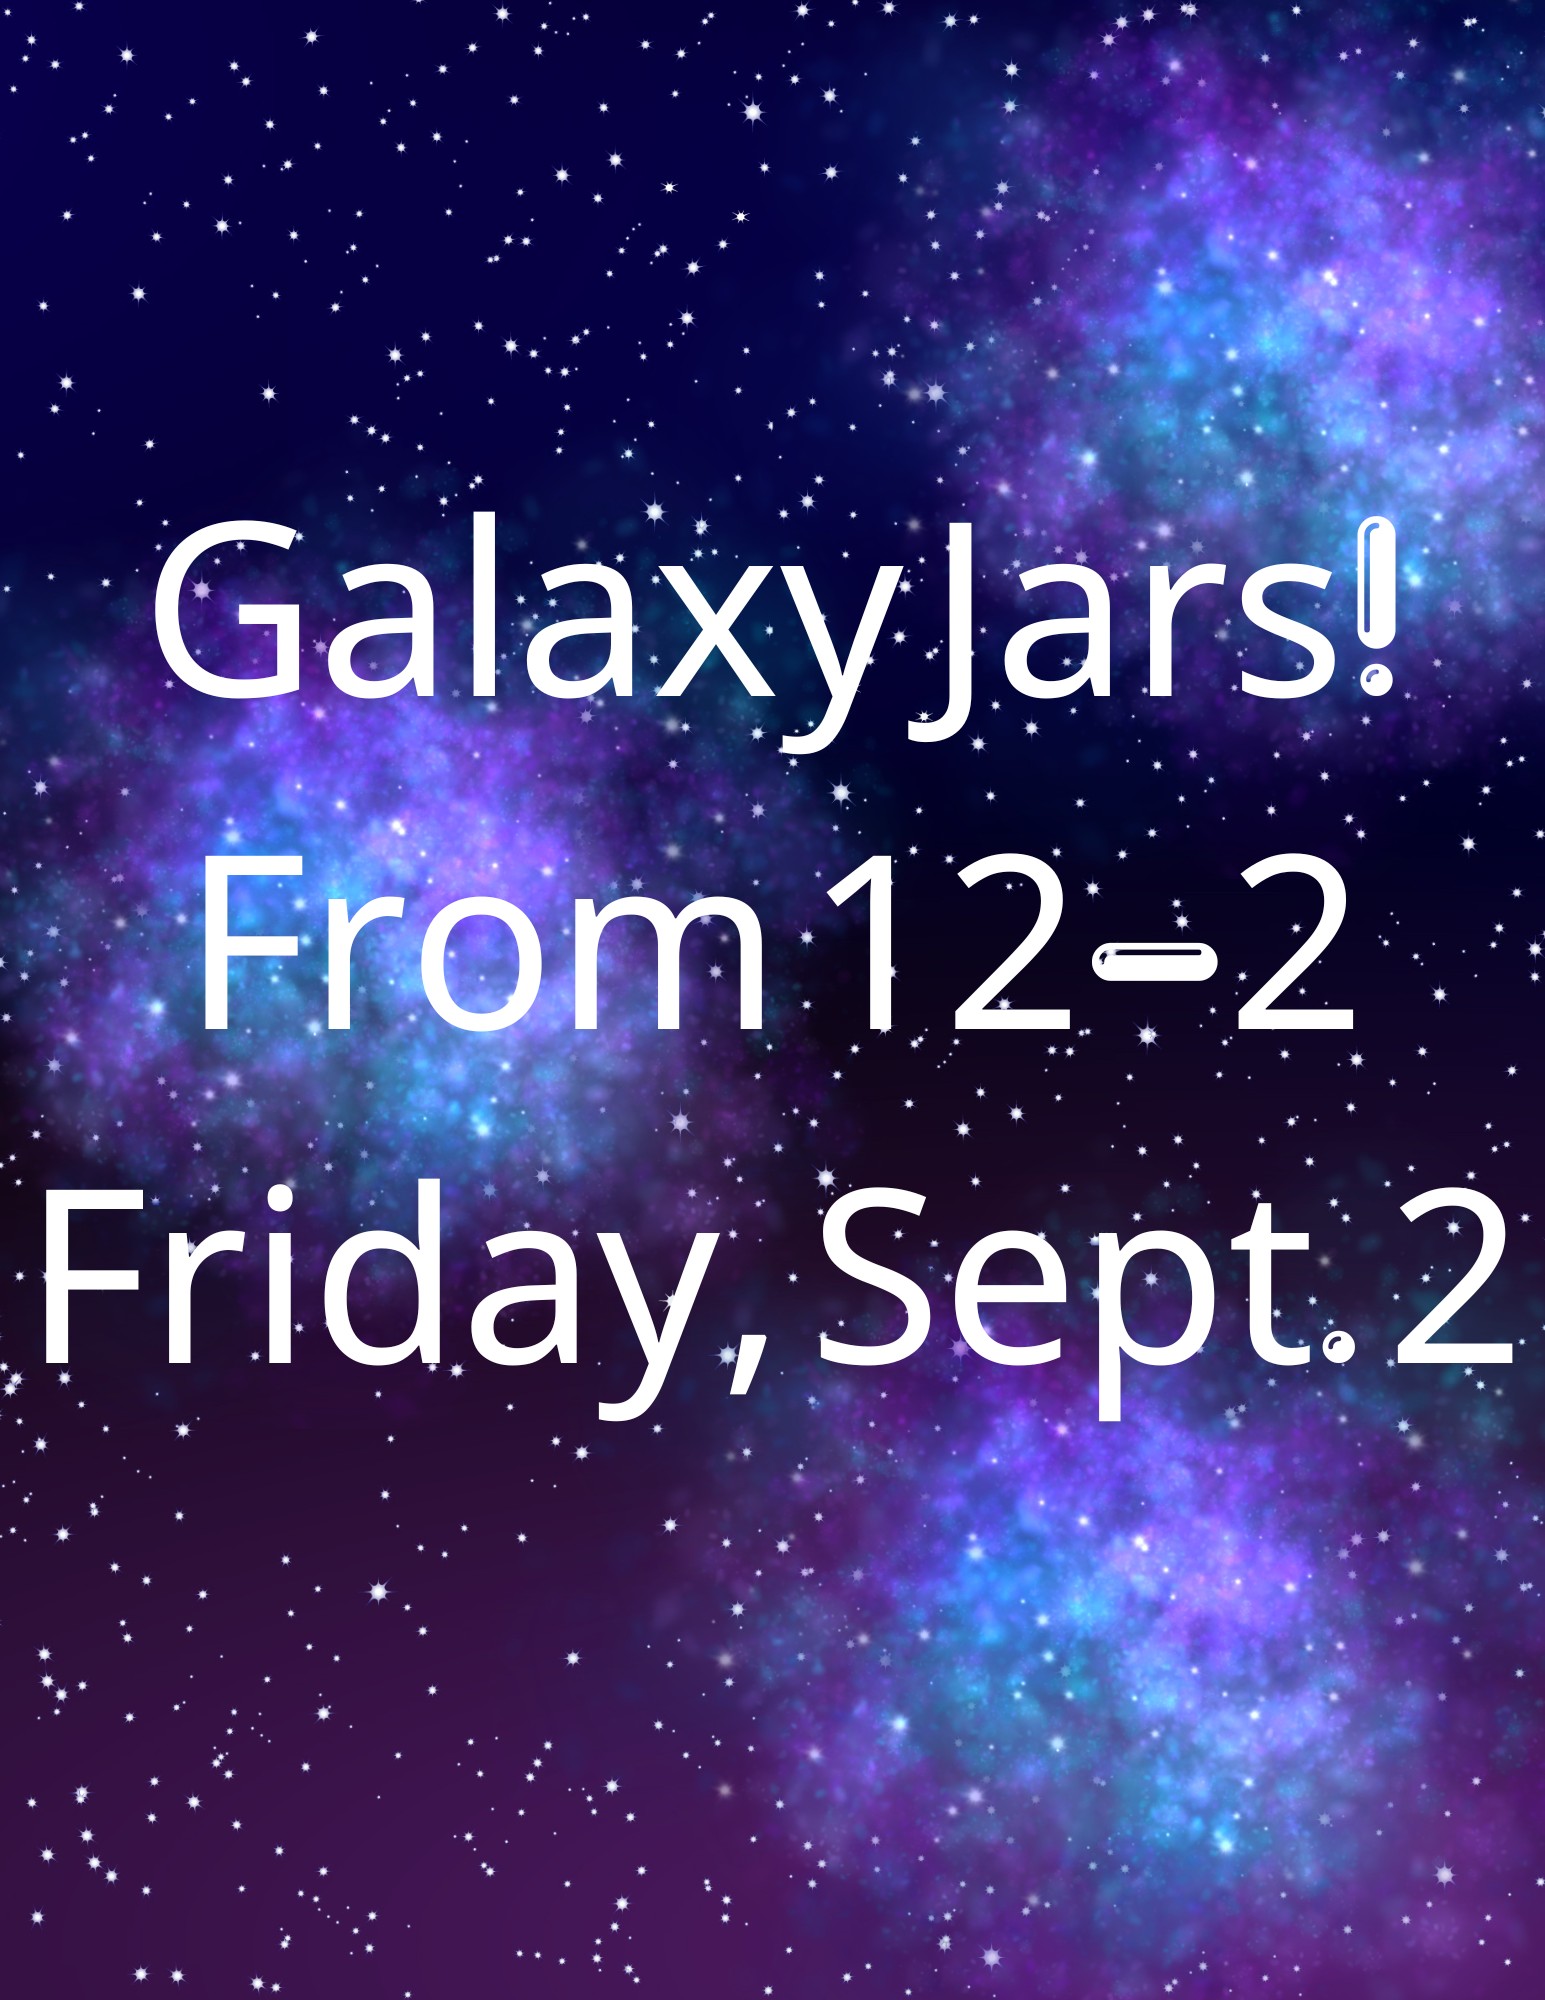 Blue and purple galaxy background behind white text: "GalaxyJars! | From 12-2 | Friday, Sept. 2"